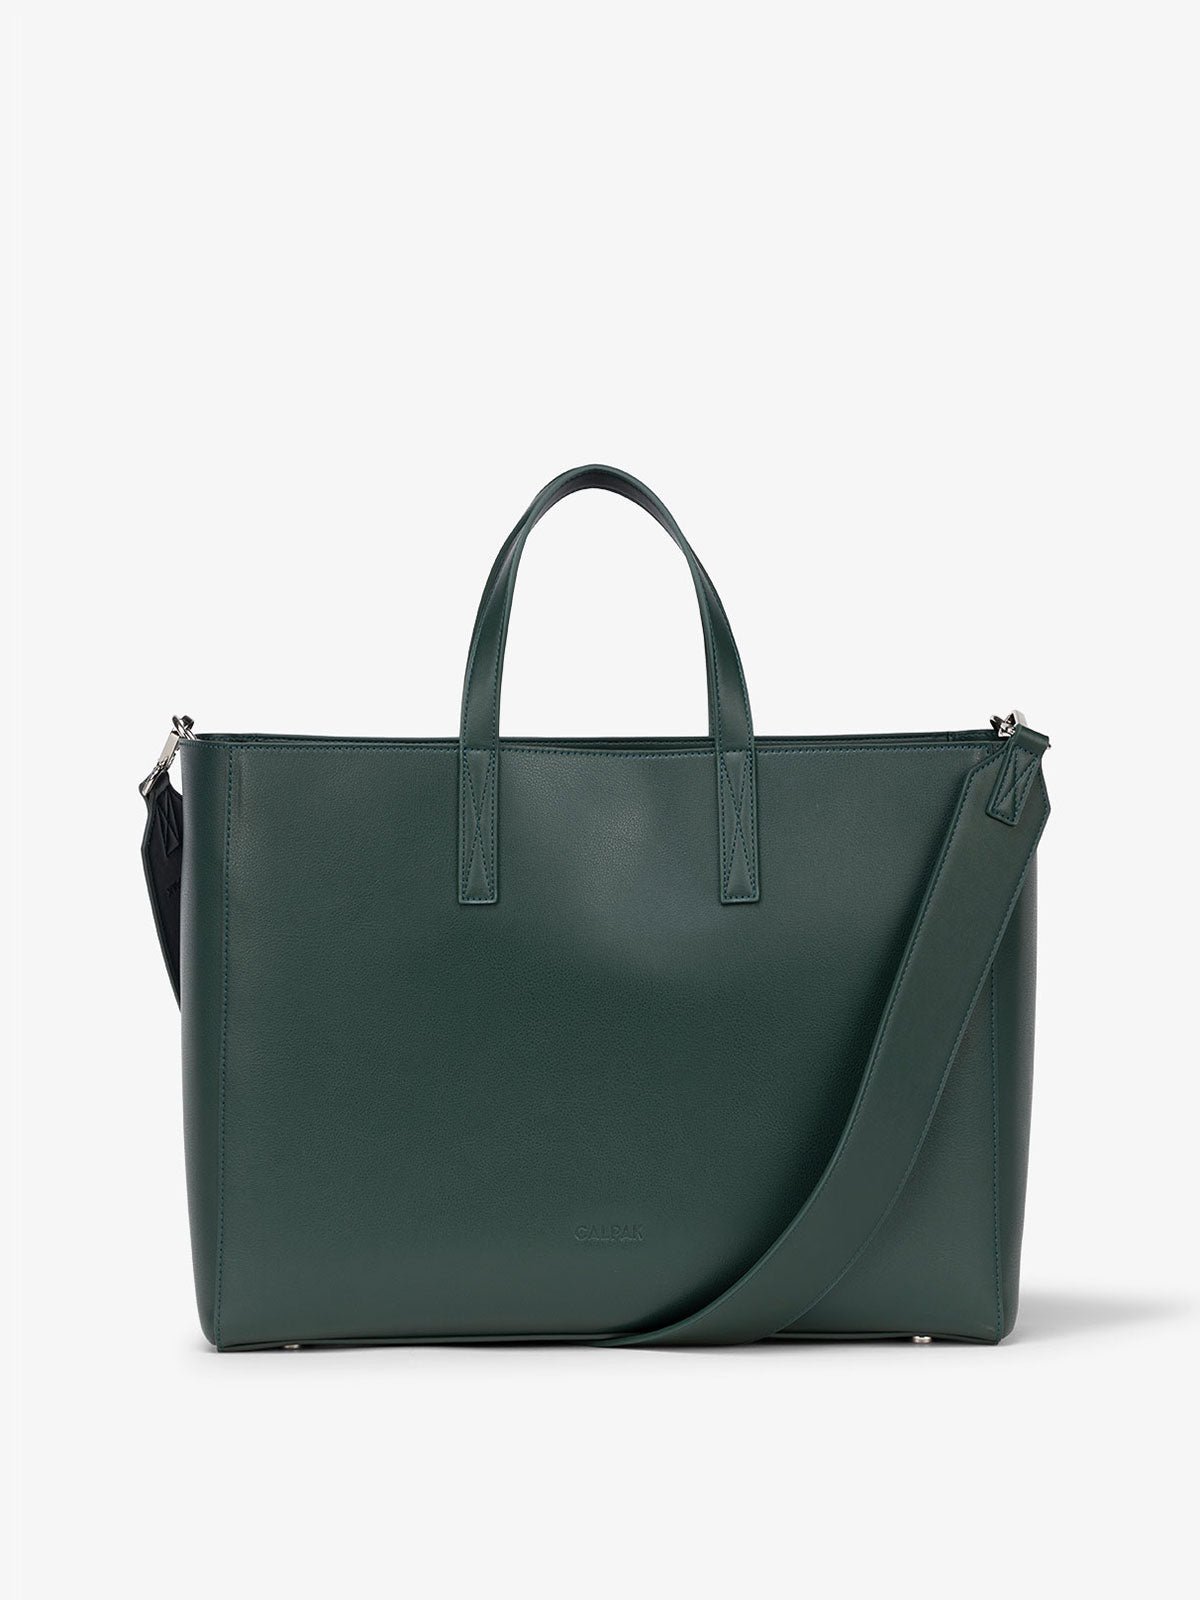 Haven laptop tote bag in forest